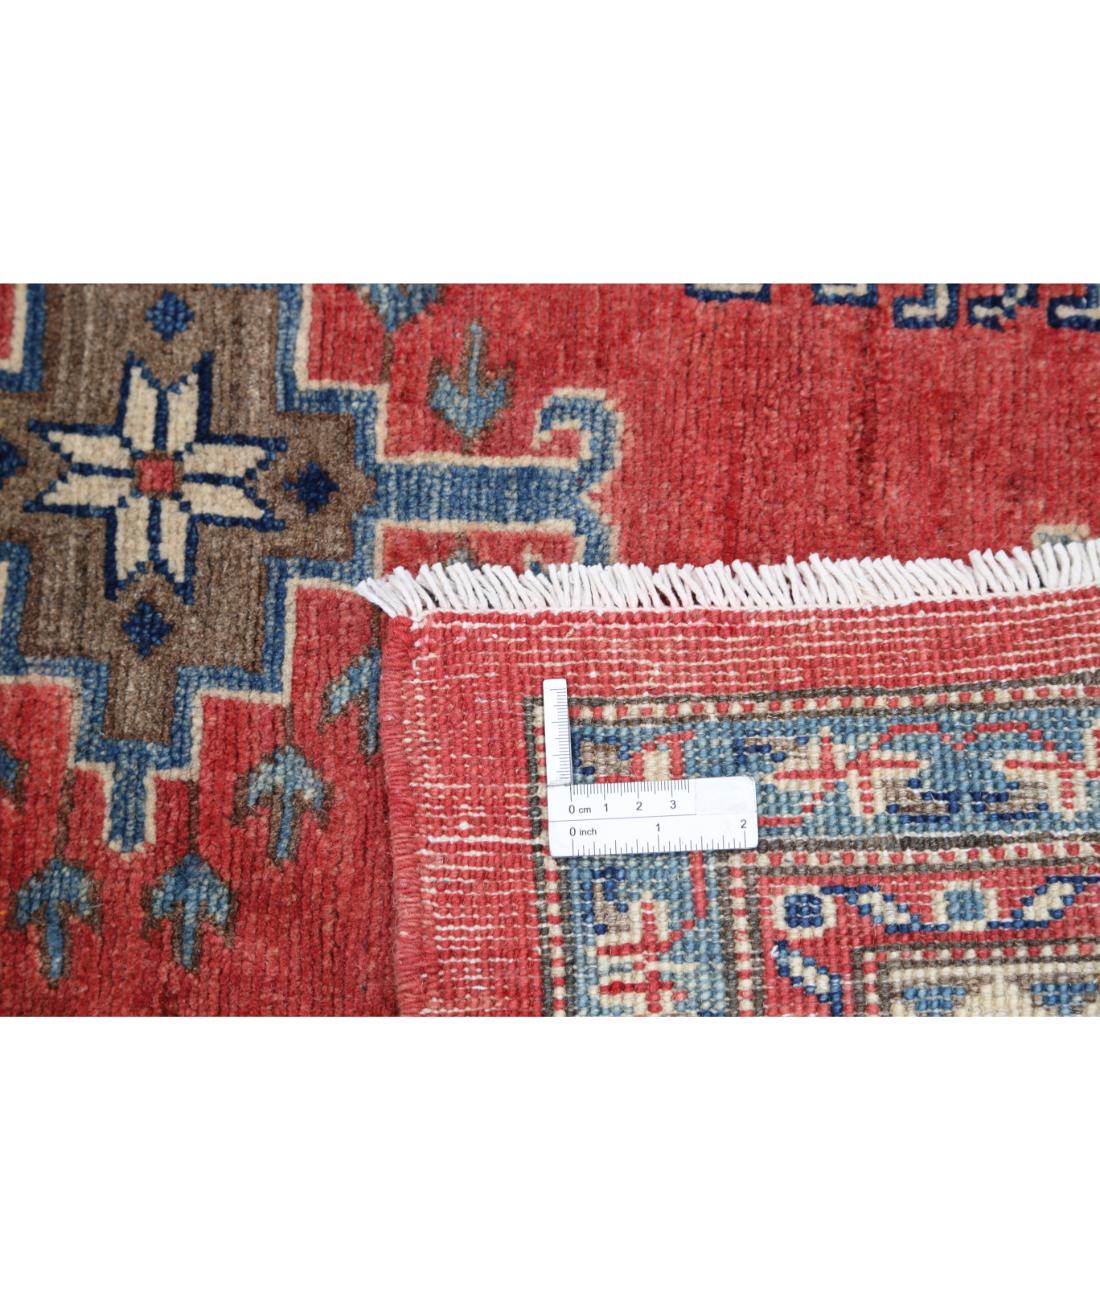 Hand Knotted Tribal Kazak Wool Rug - 8'11'' x 11'2'' 8' 11" X 11' 2" (272 X 340) / Red / Ivory